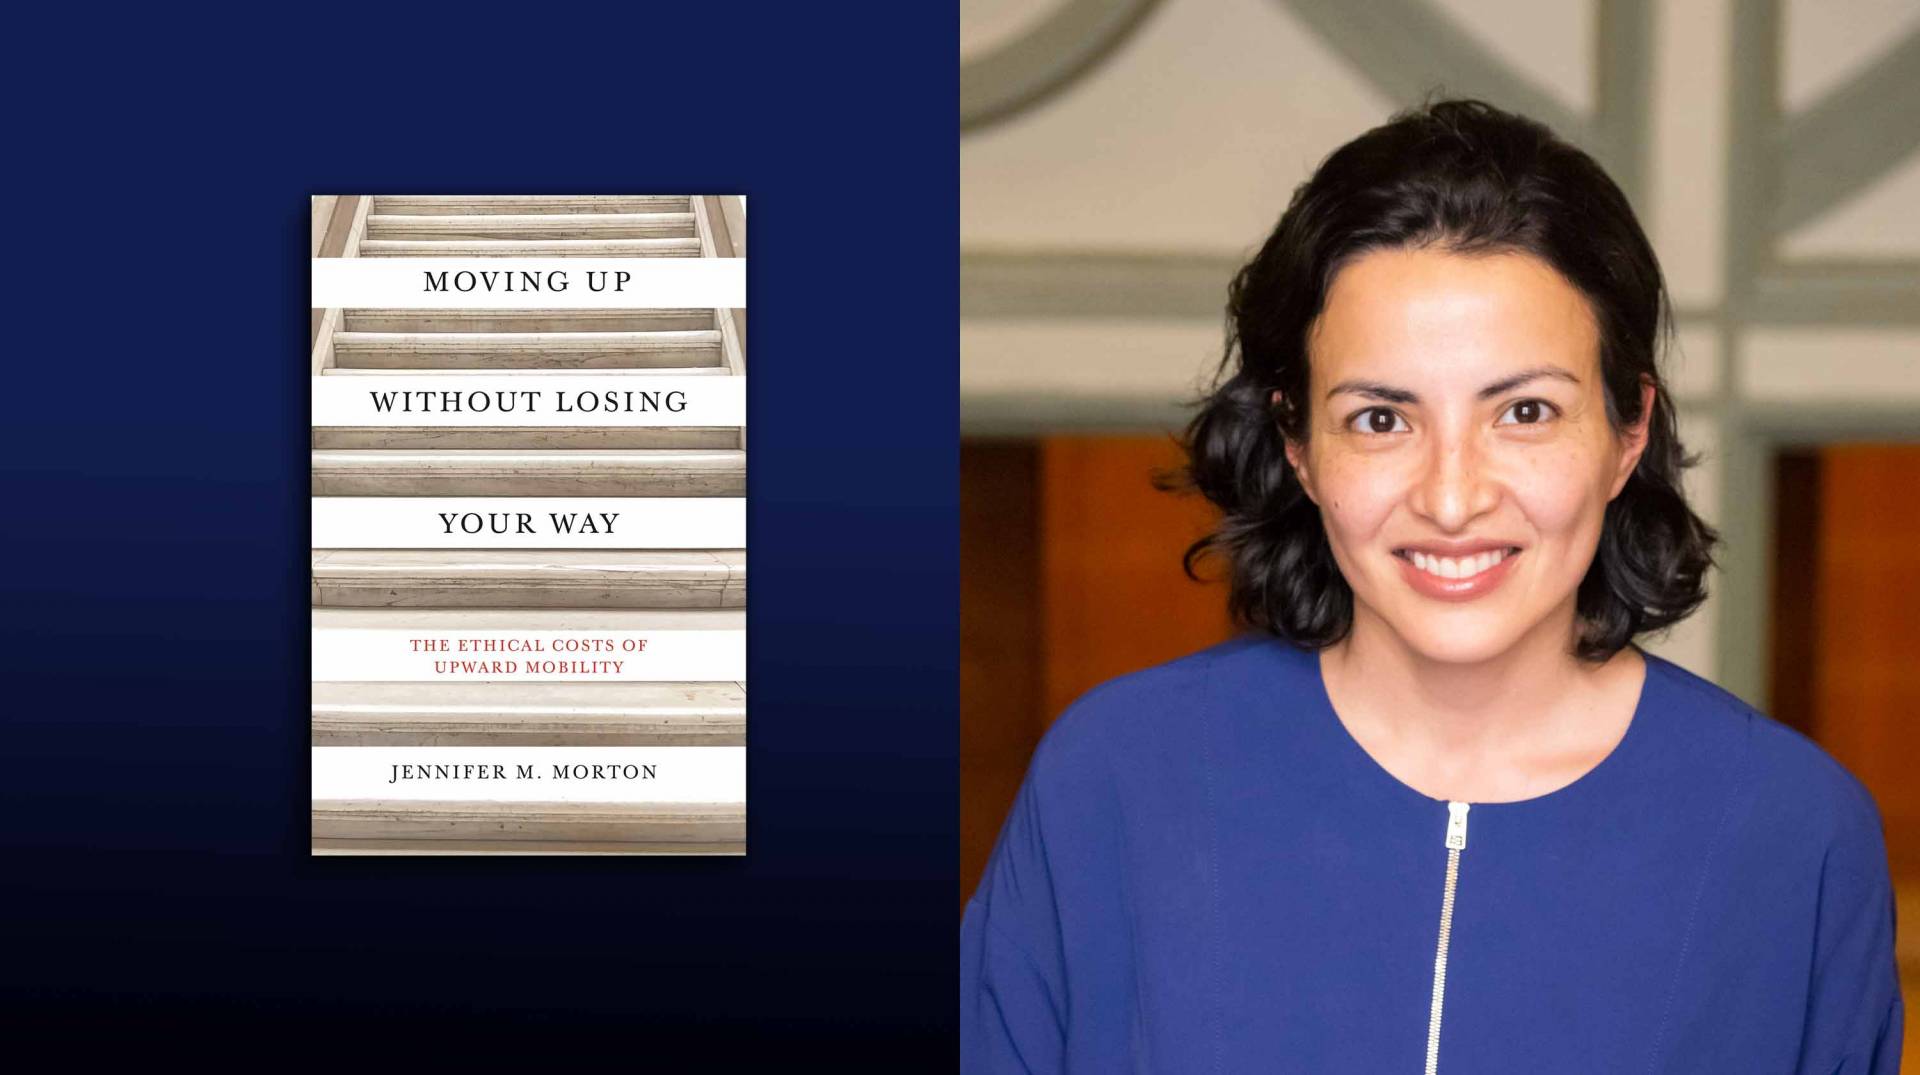 Cover of book "Moving Up Without Losing Your Way: The Ethical Costs of Upward Mobility" by Jennifer M. Morton and a portrait of Jennifer Morton